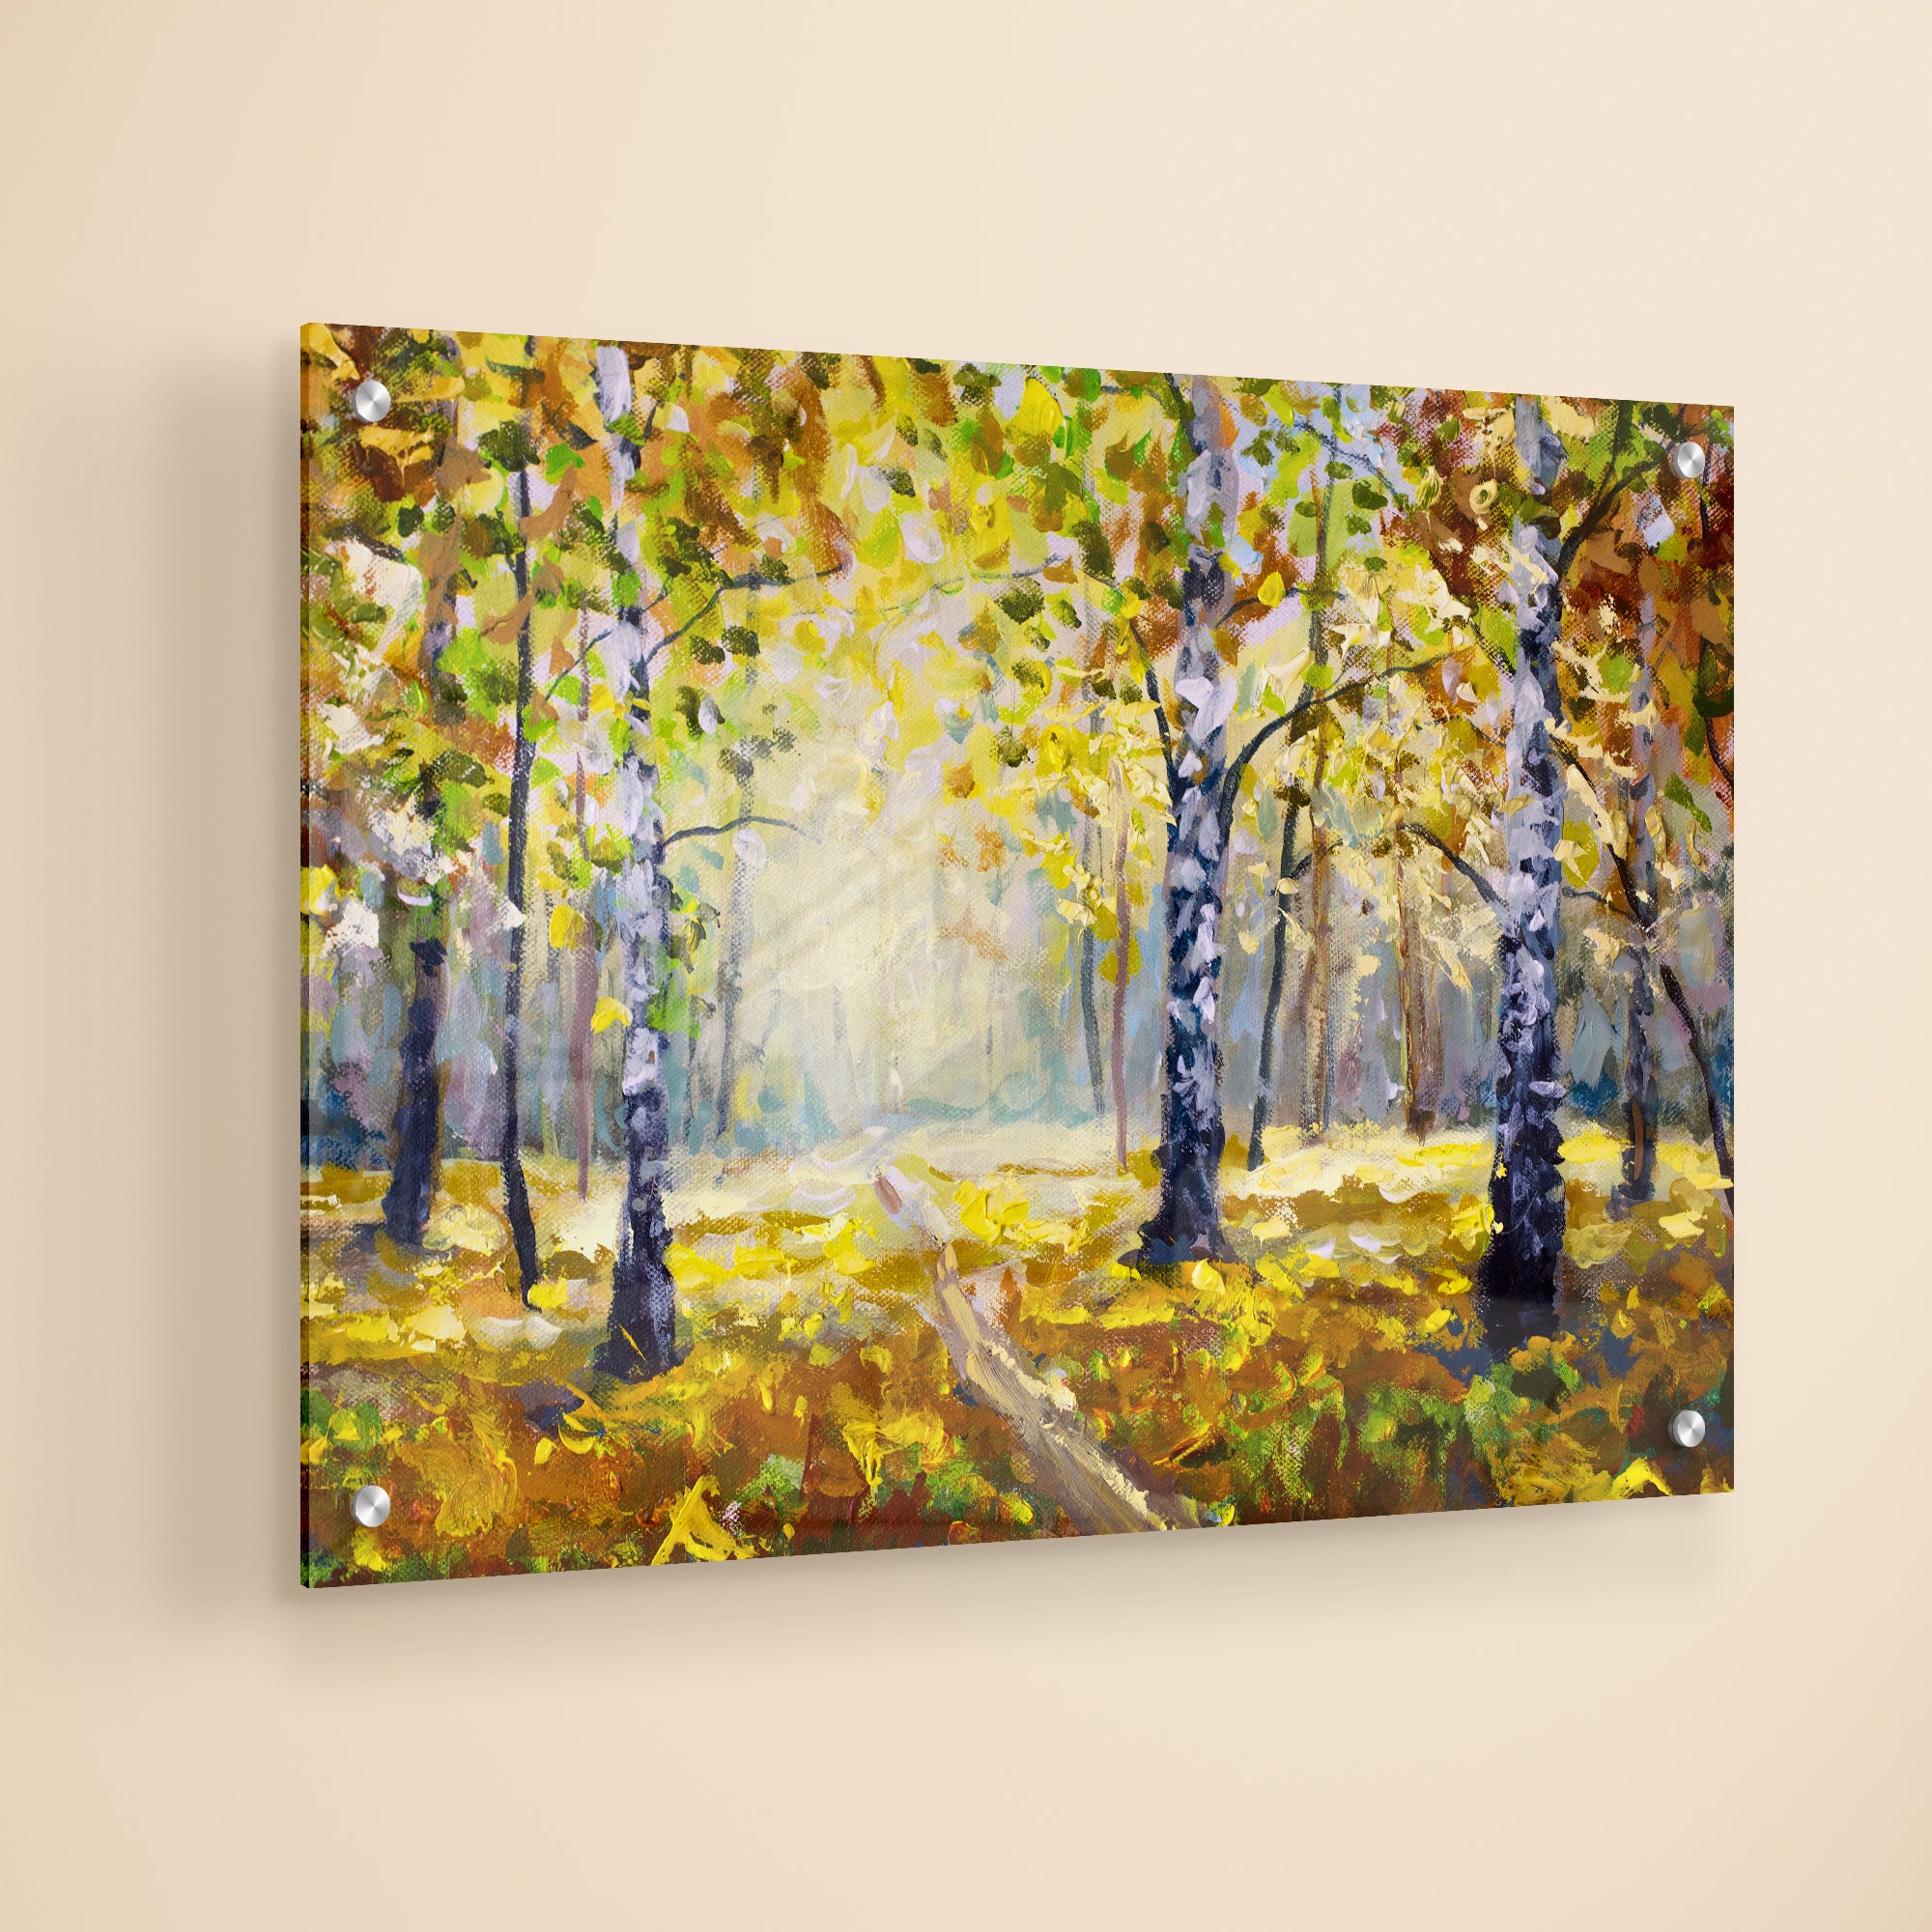 The Rain Forest Acrylic Wall Painting